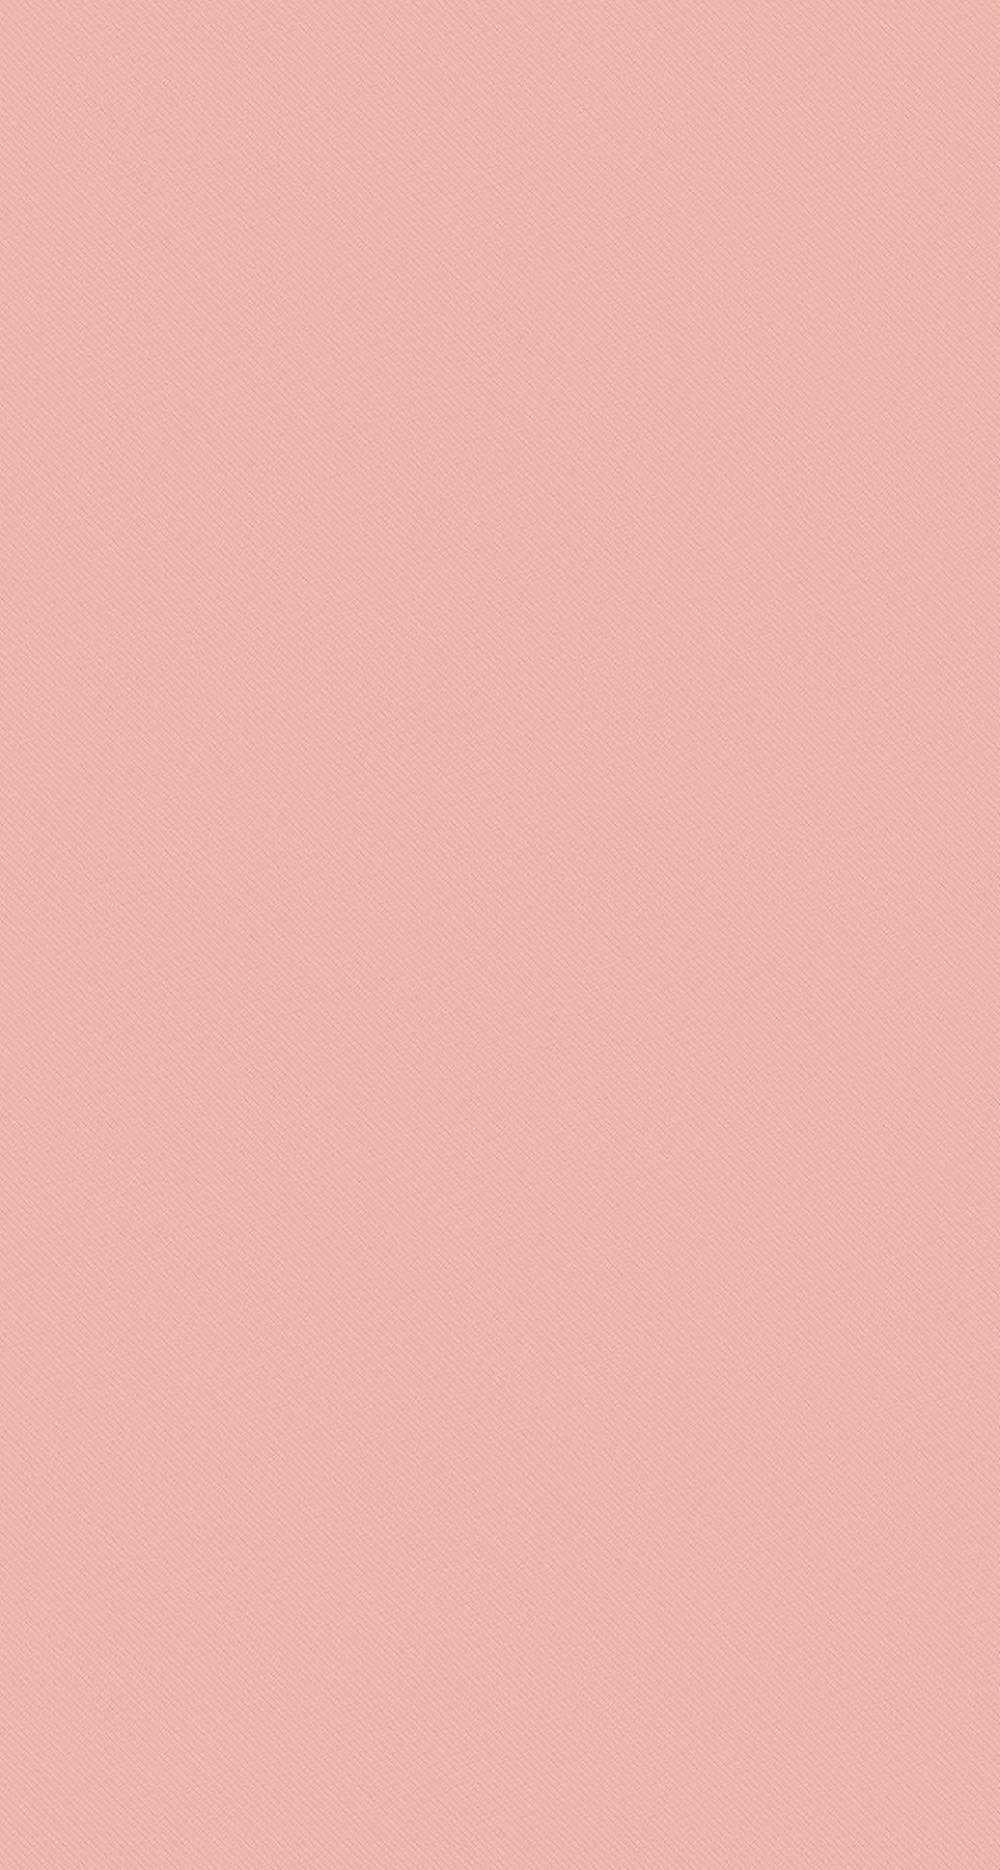 A light pink background with a slight texture - Salmon